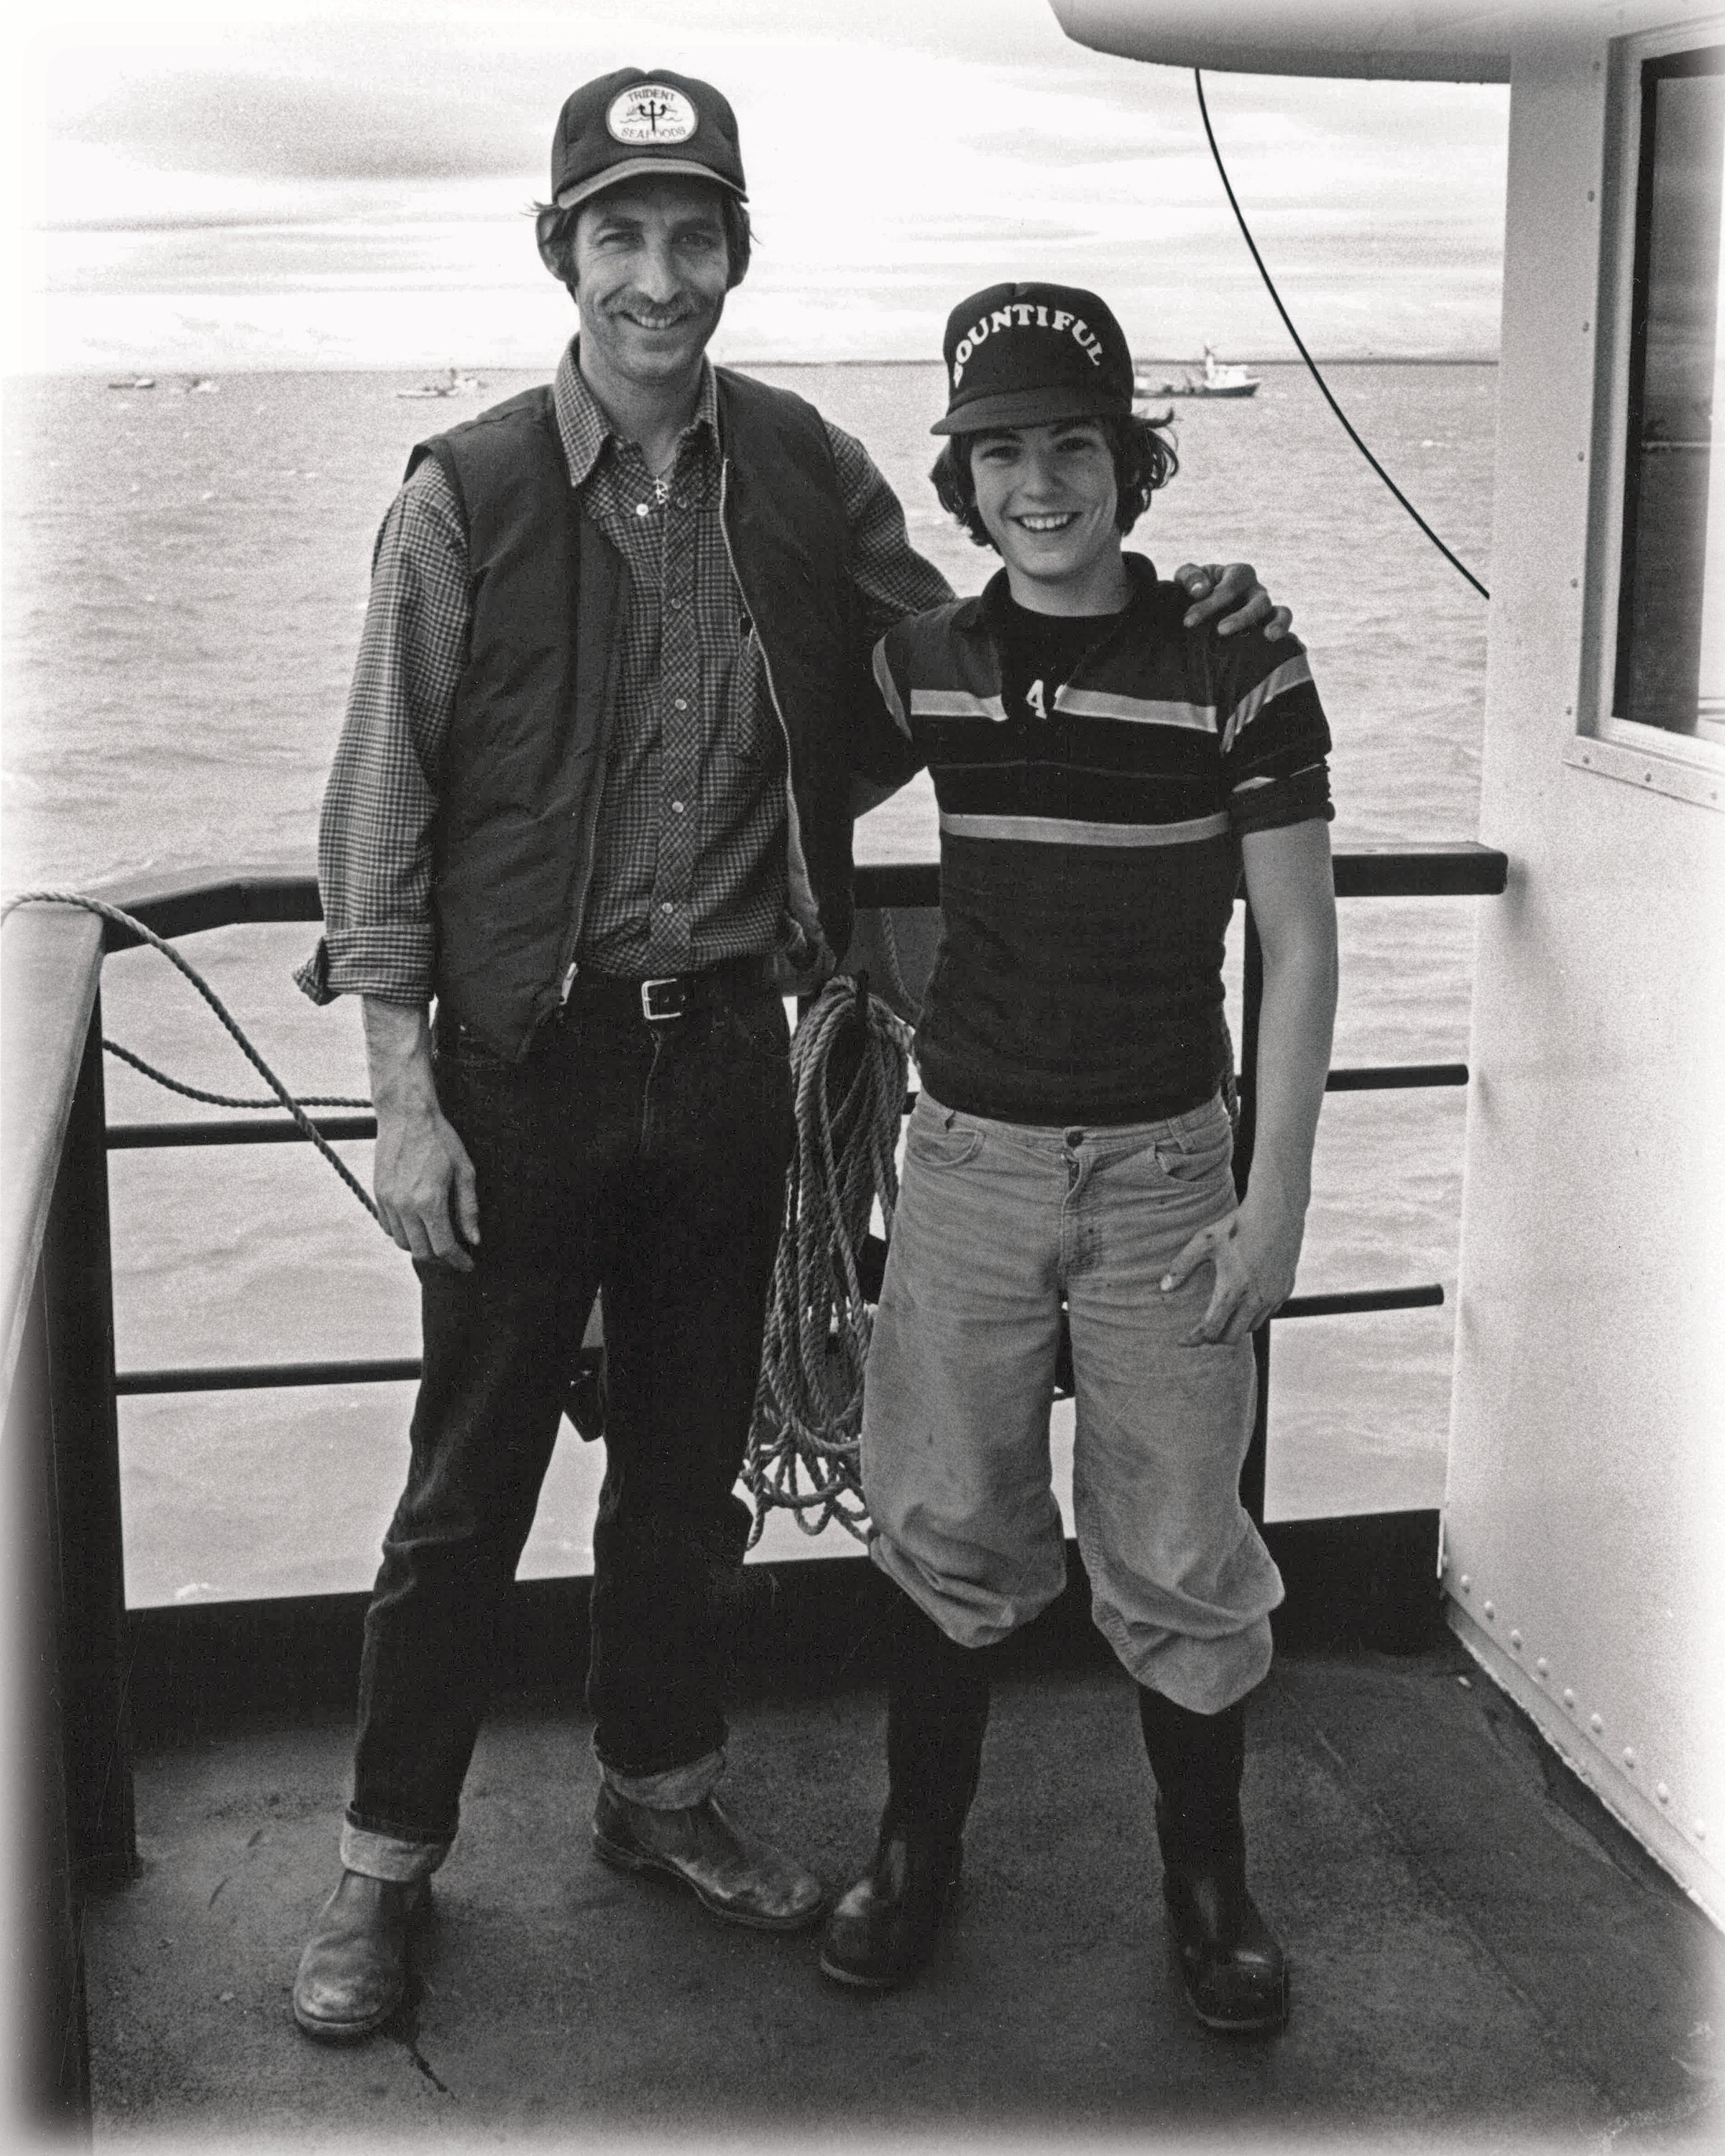 Chuck and Joe Bundrant standing together on a boat